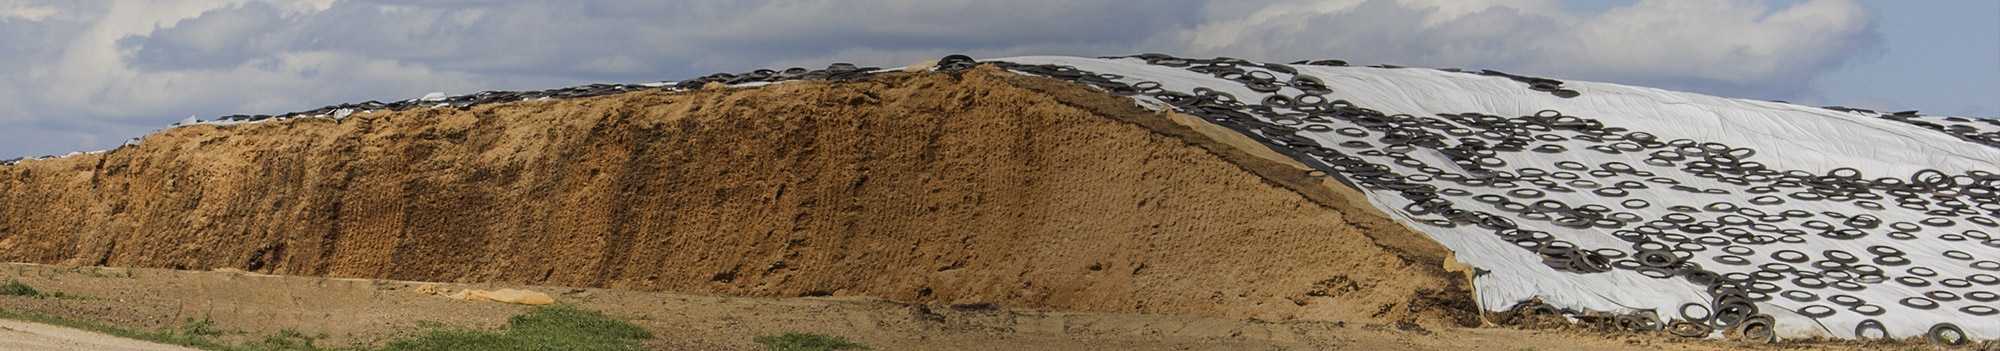 SILAGE-COVERS.jpg